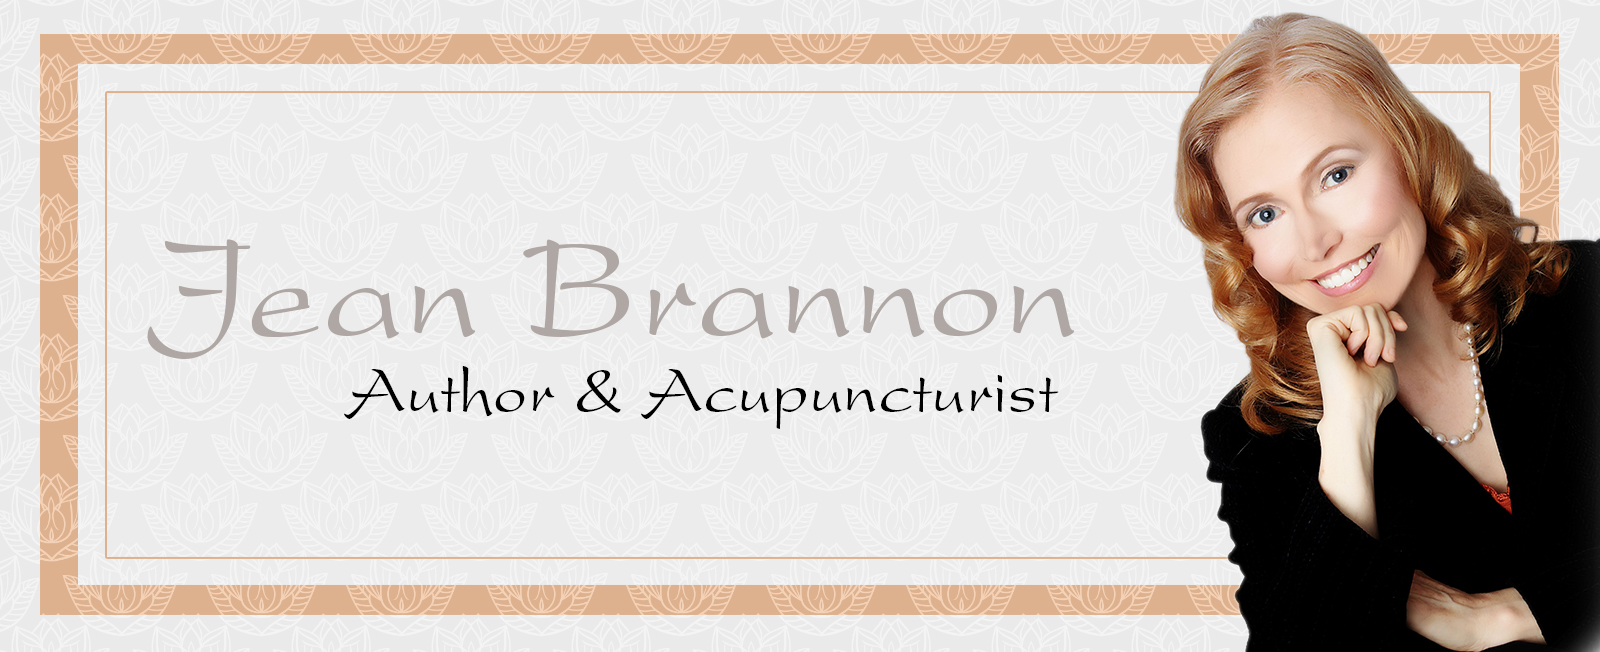 About Jean Brannon The Author and Licensed Acupuncturist